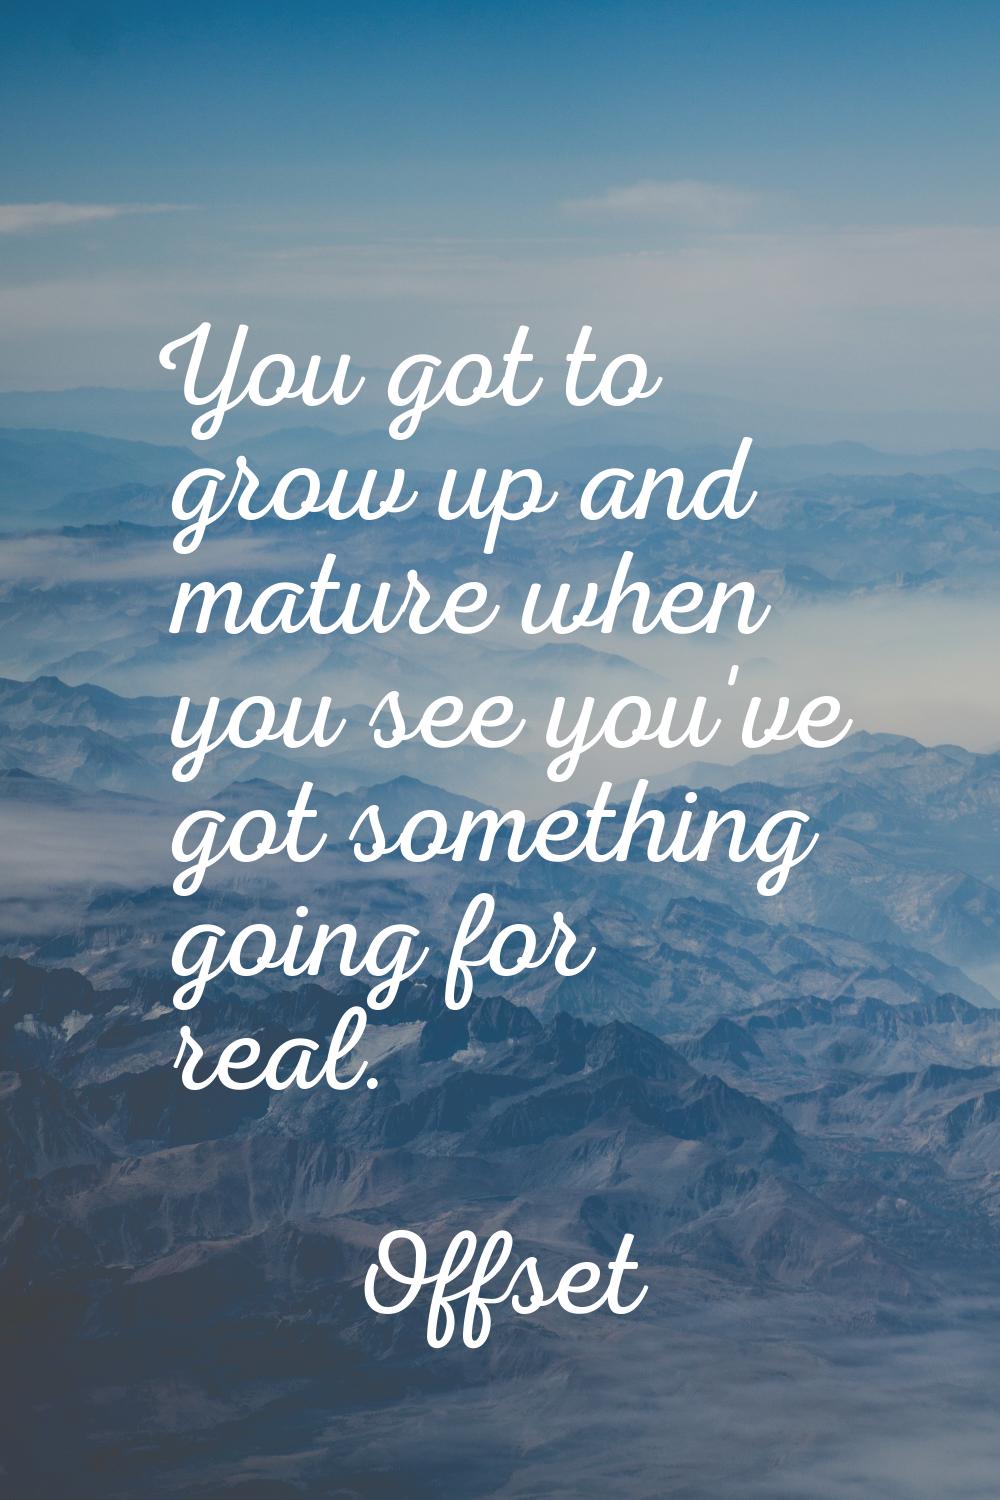 You got to grow up and mature when you see you've got something going for real.